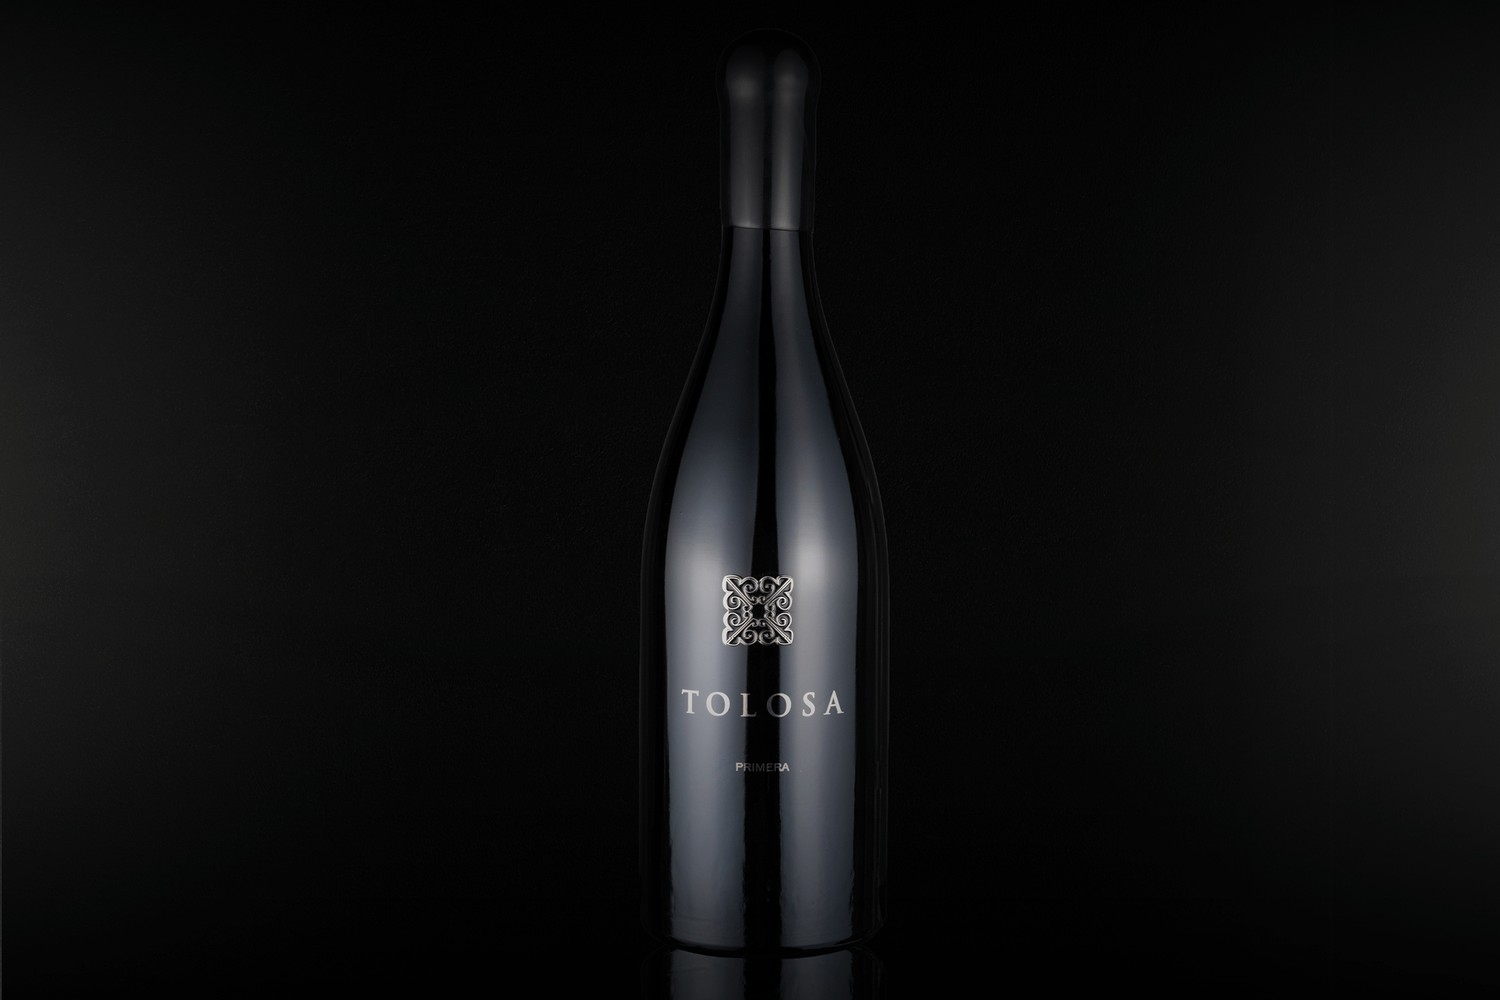 Primera 2021 is coming on March 13. Image of Primera bottle